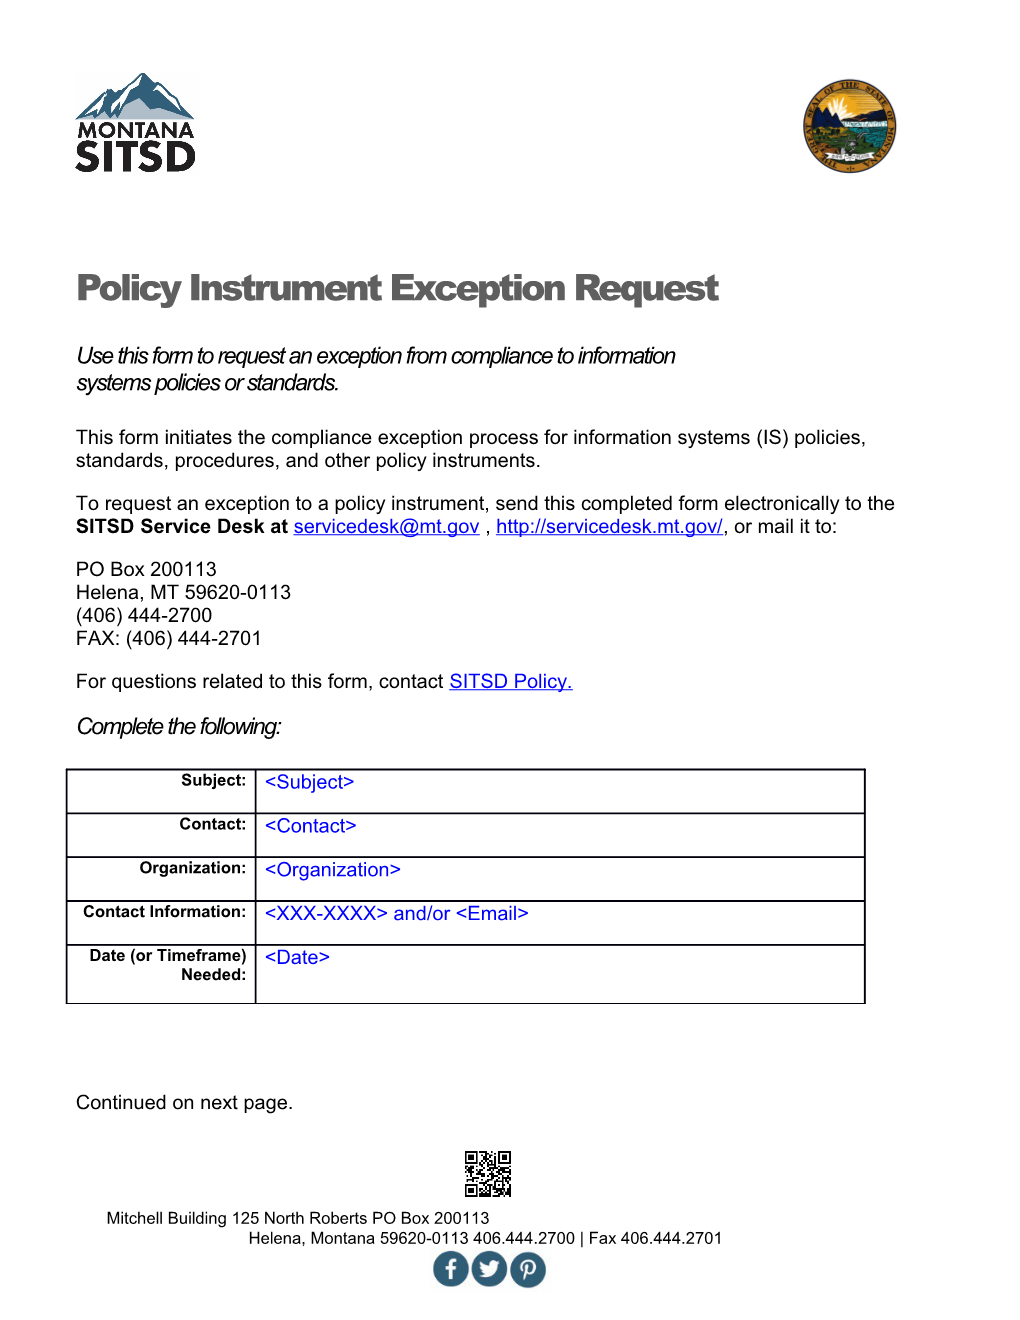 Policy Instrument Exception Request